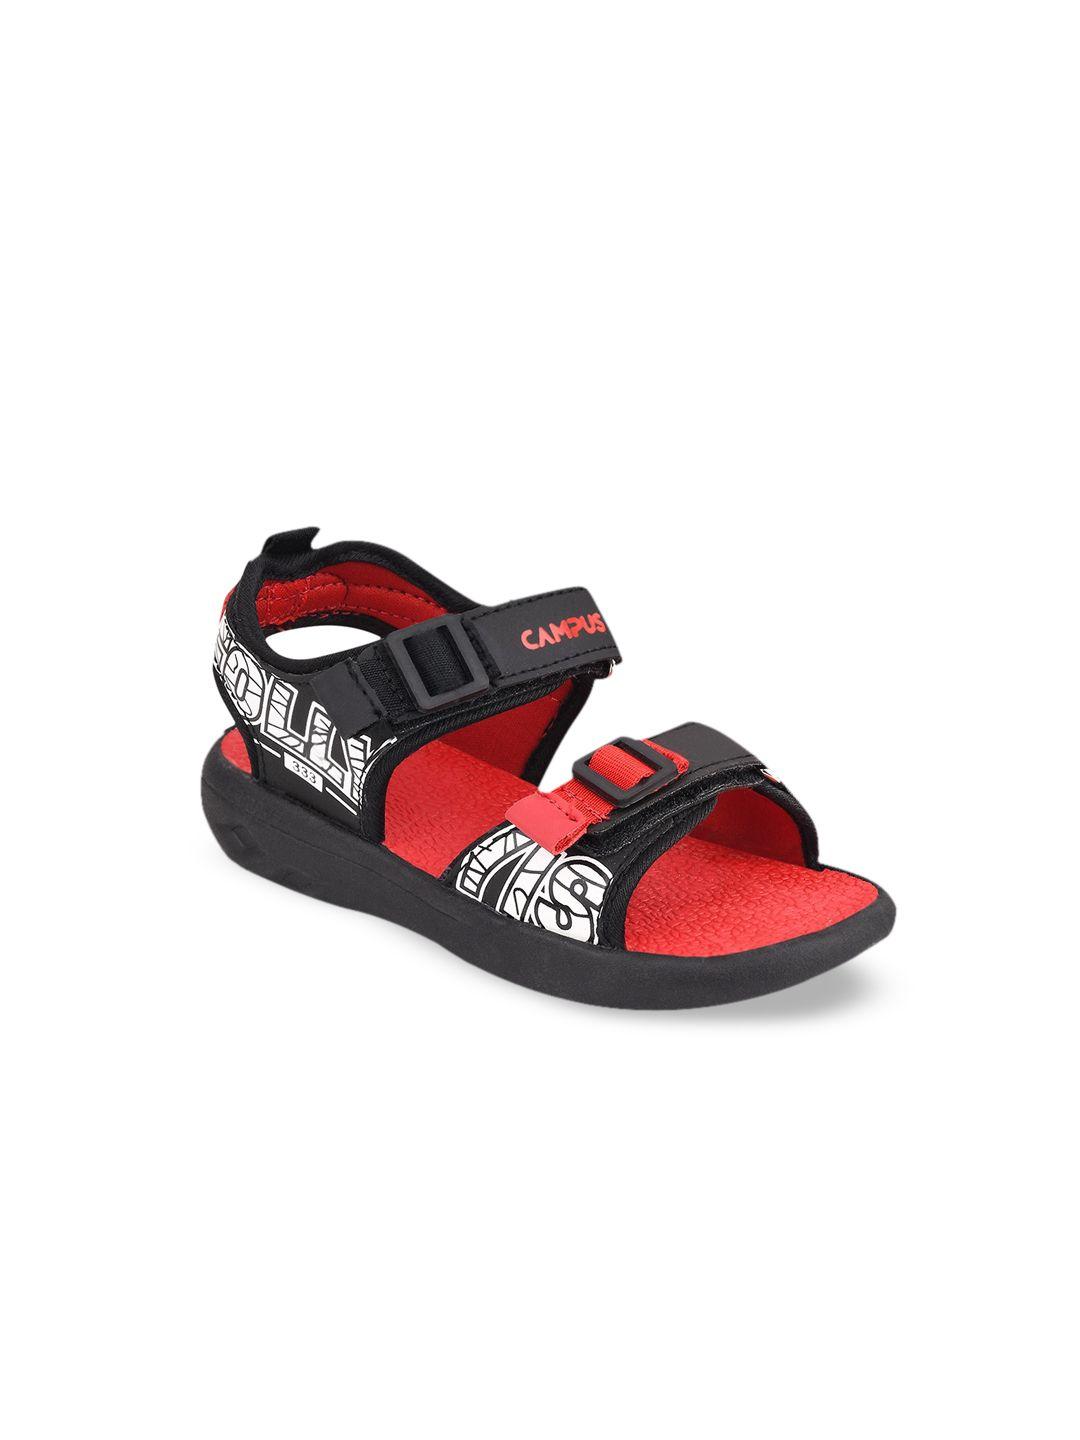 campus kids black & red solid sports sandals